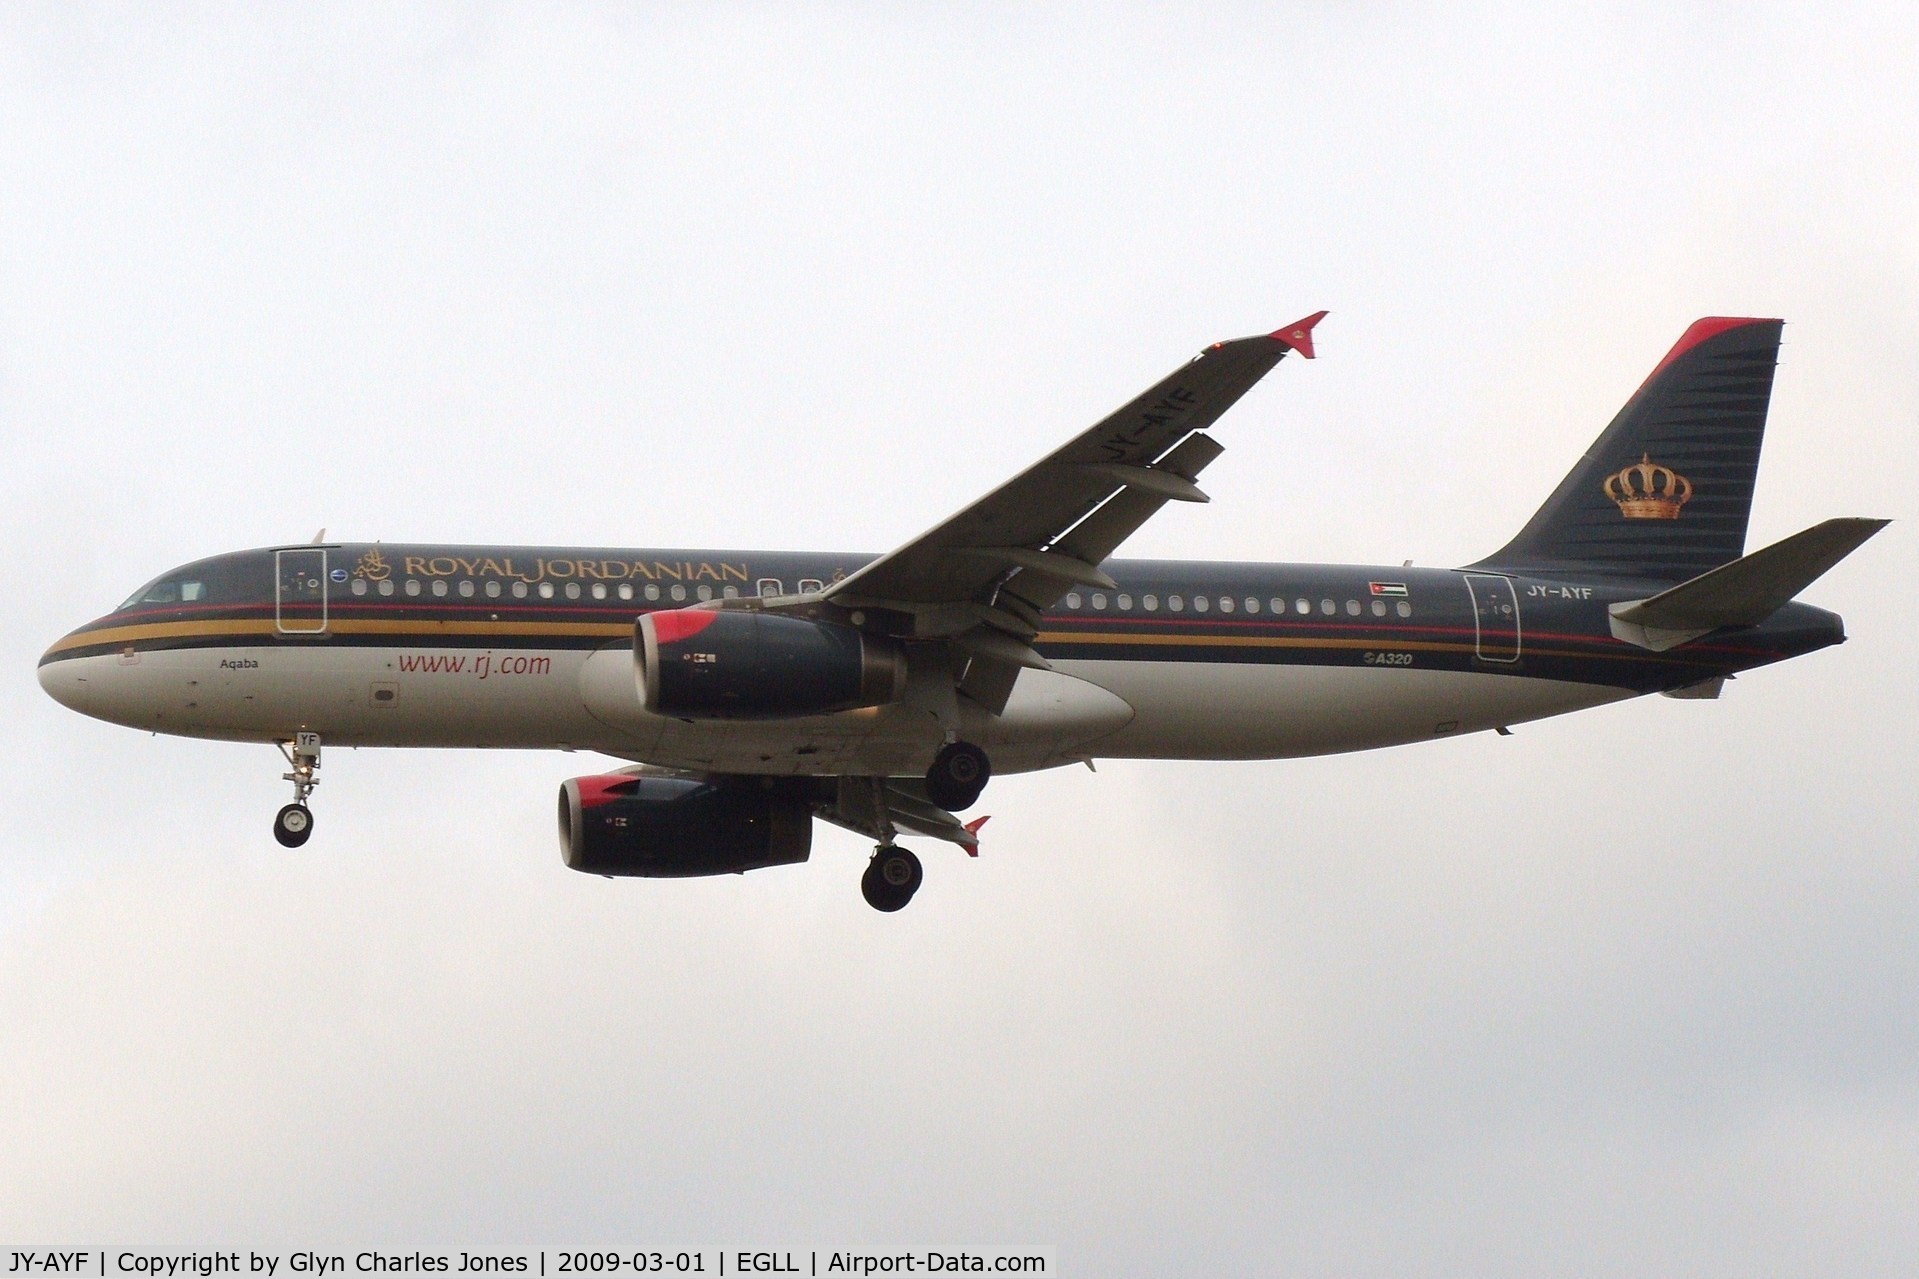 JY-AYF, 2006 Airbus A320-232 C/N 2692, 'Aqaba' on finals to runway 27L. Test registration was F-WWIH. Royal Jordanian A320s are not common at London-Heathrow.